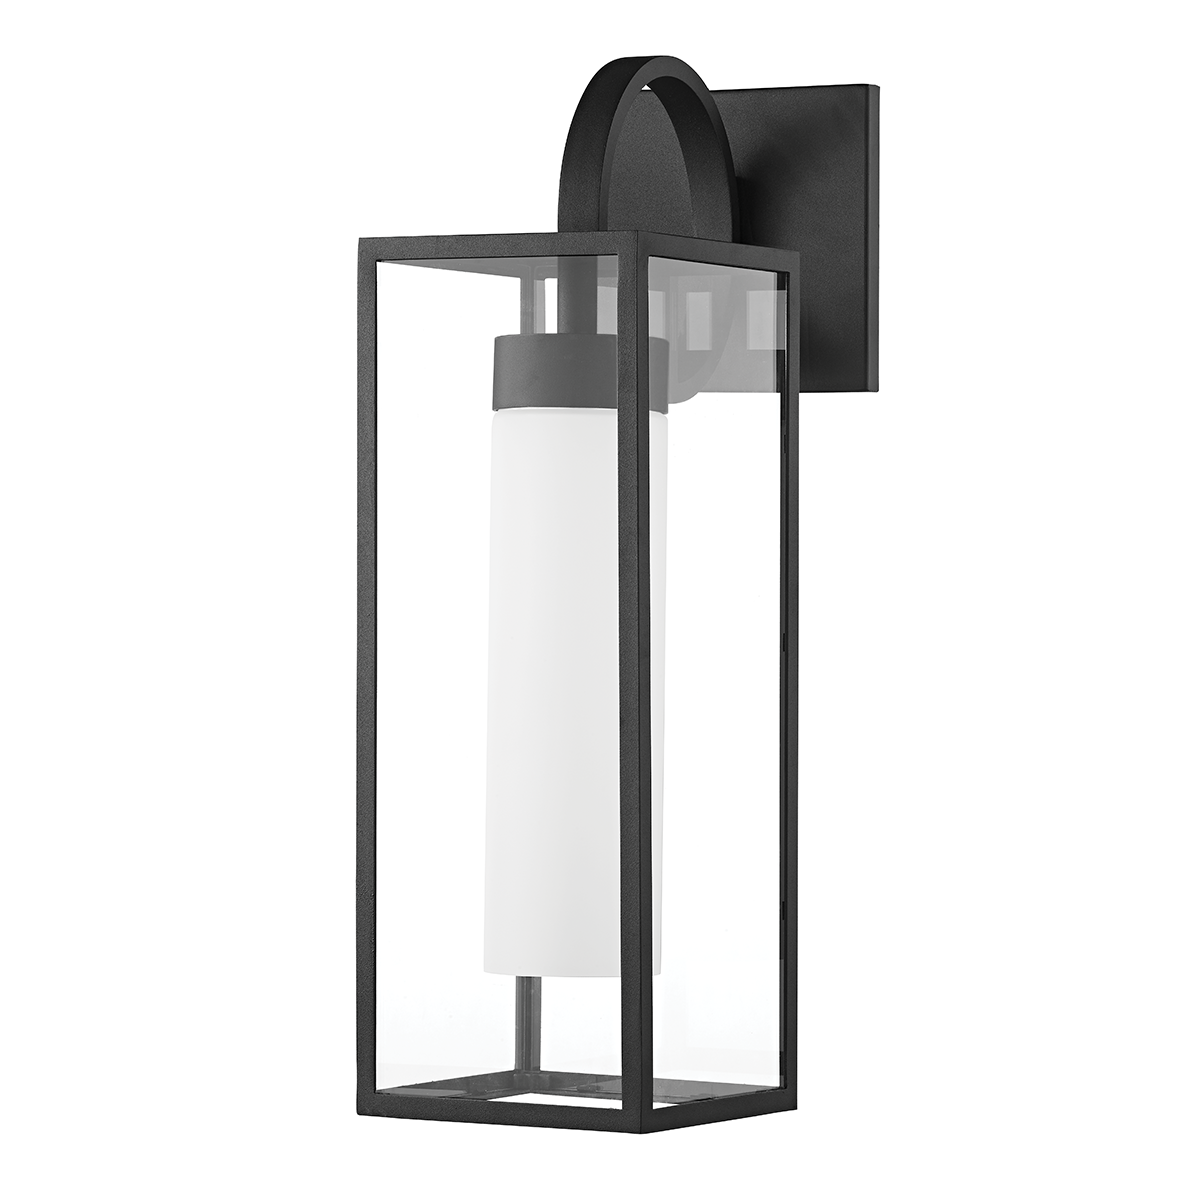 Troy Lighting 1 LIGHT LARGE EXTERIOR WALL SCONCE B6913 Outdoor l Wall Troy Lighting TEXTURE BLACK  